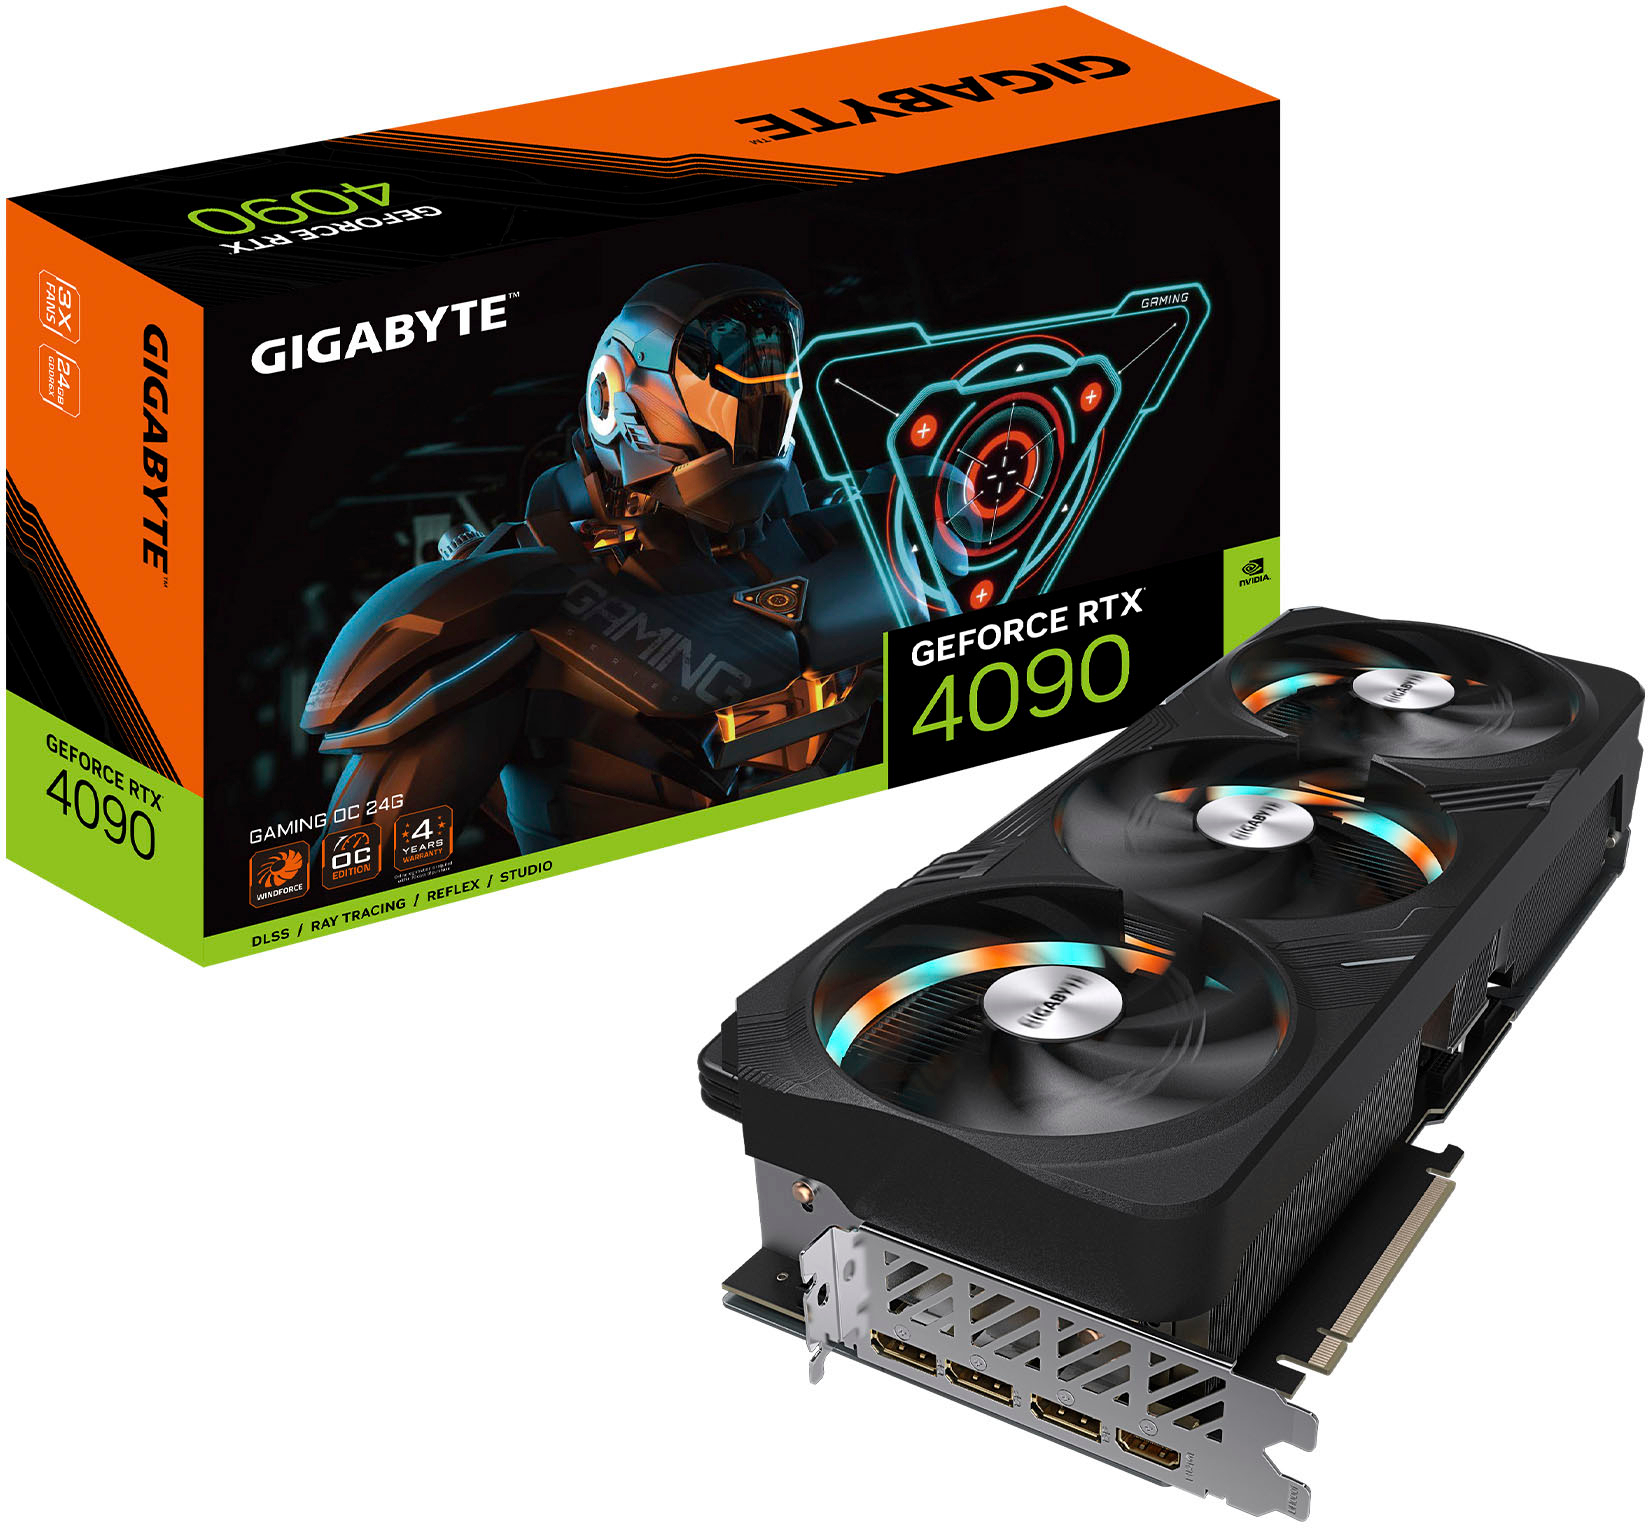 Questions and Answers: GIGABYTE NVIDIA GeForce RTX 4090 Gaming OC 24GB ...